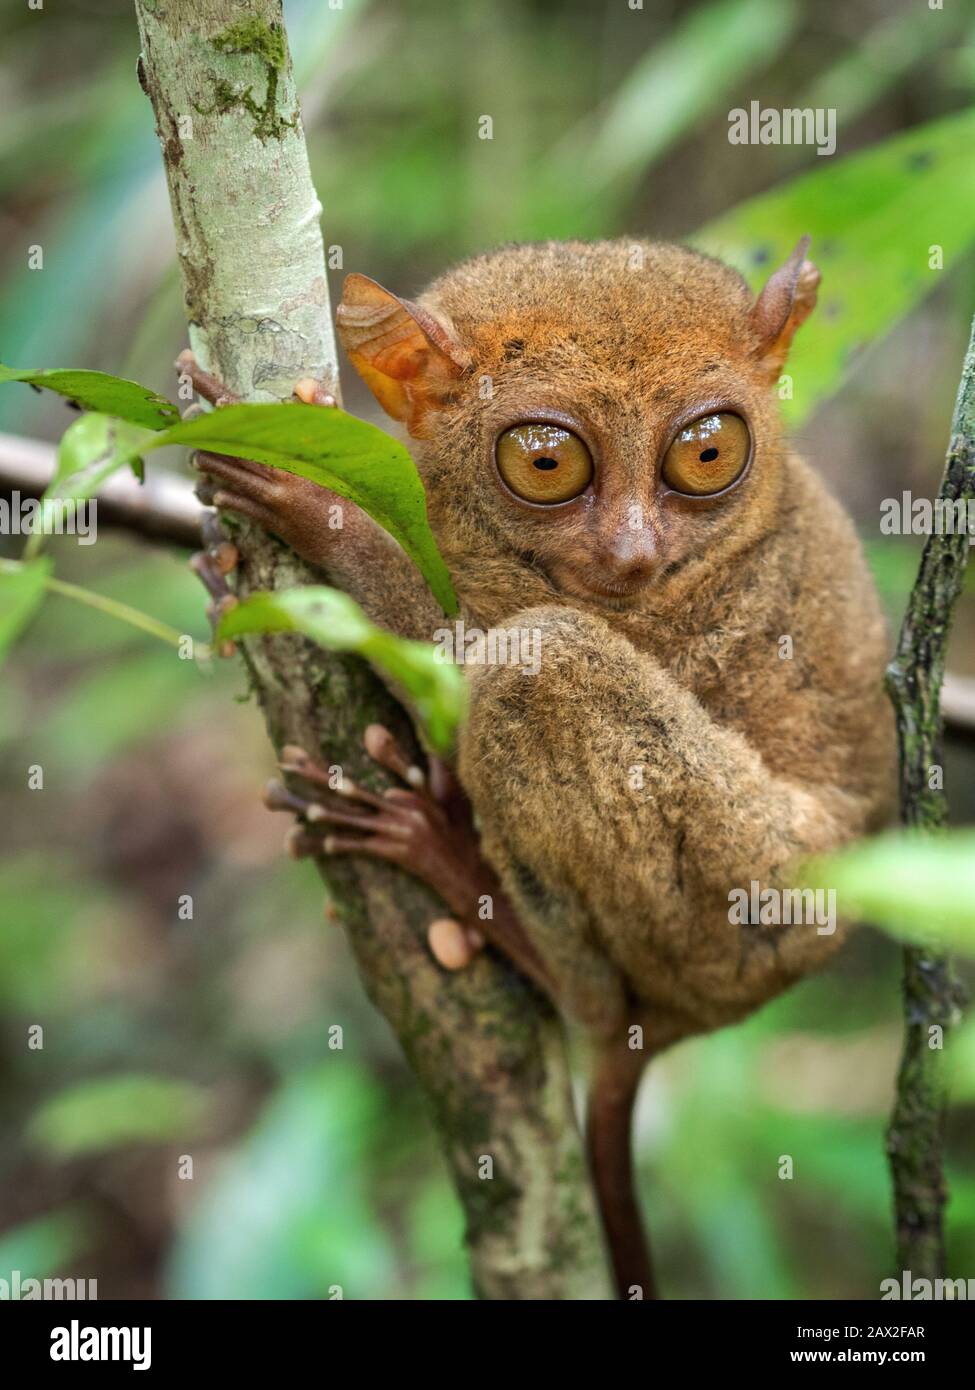 Philippine Tarsier, one of the smallest primates, in its natural habitat in Bohol, Philippines. Stock Photo